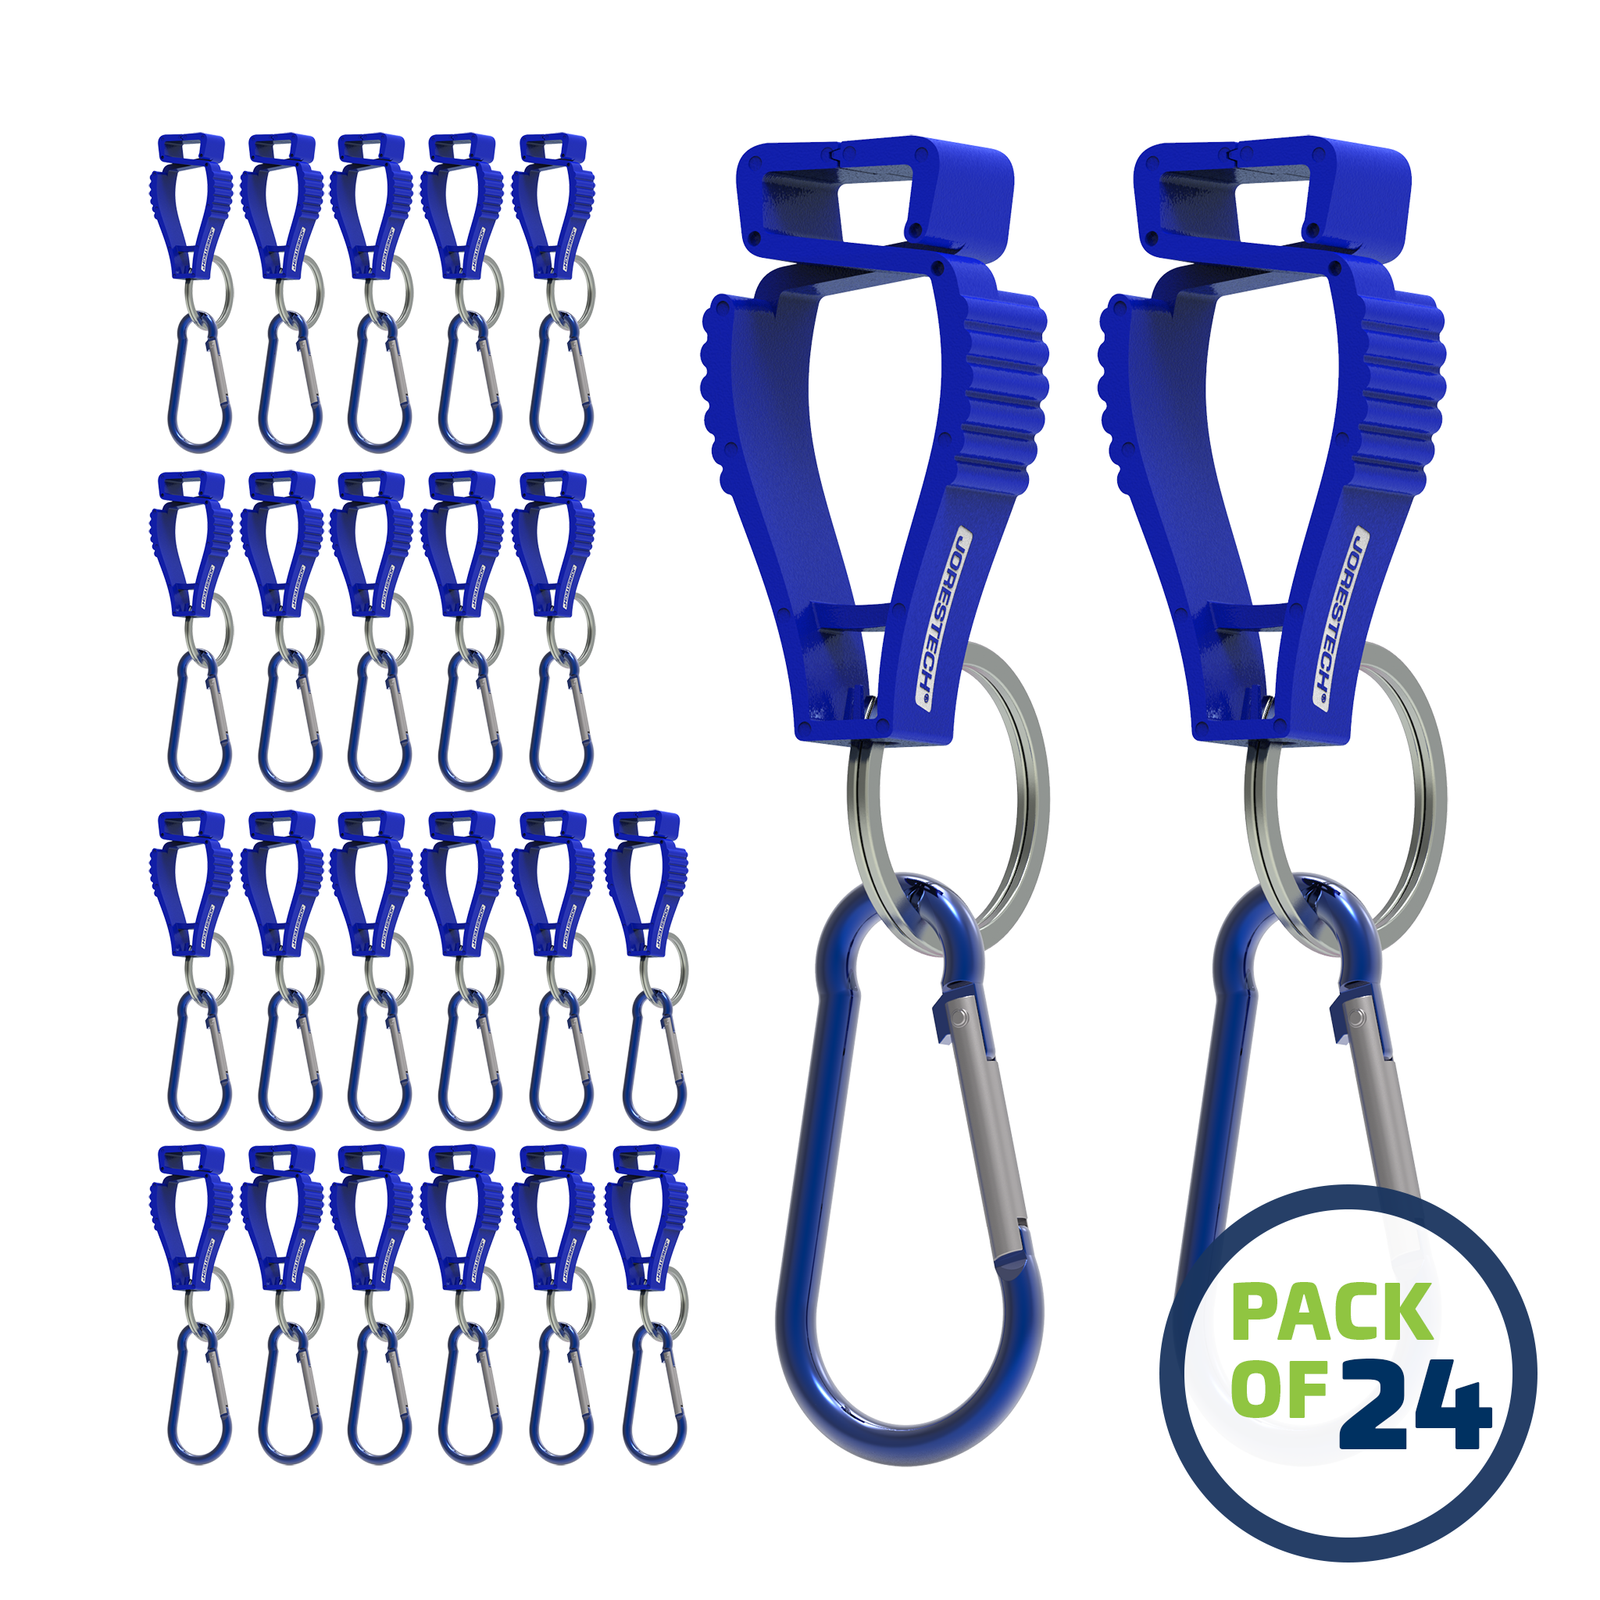 image of a pack of 24 Blue JORESTECH glove clip safety holders with carabiner over white background